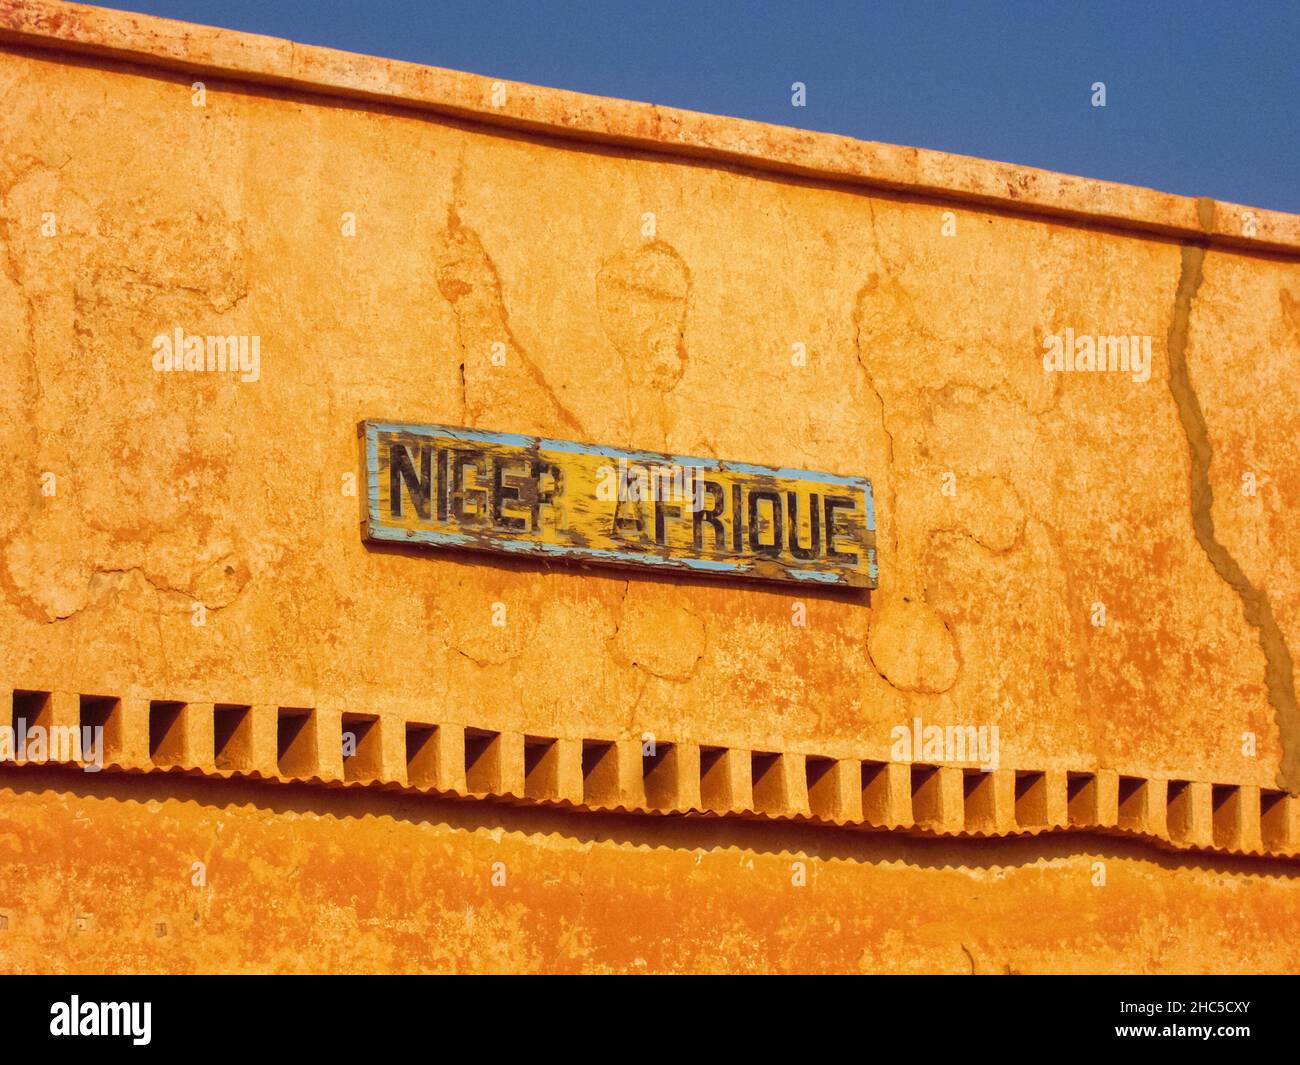 Niger Afrique, inscription on a clay wall in a village of Niger country, in western Africa. Niger has French as its official language. Stock Photo